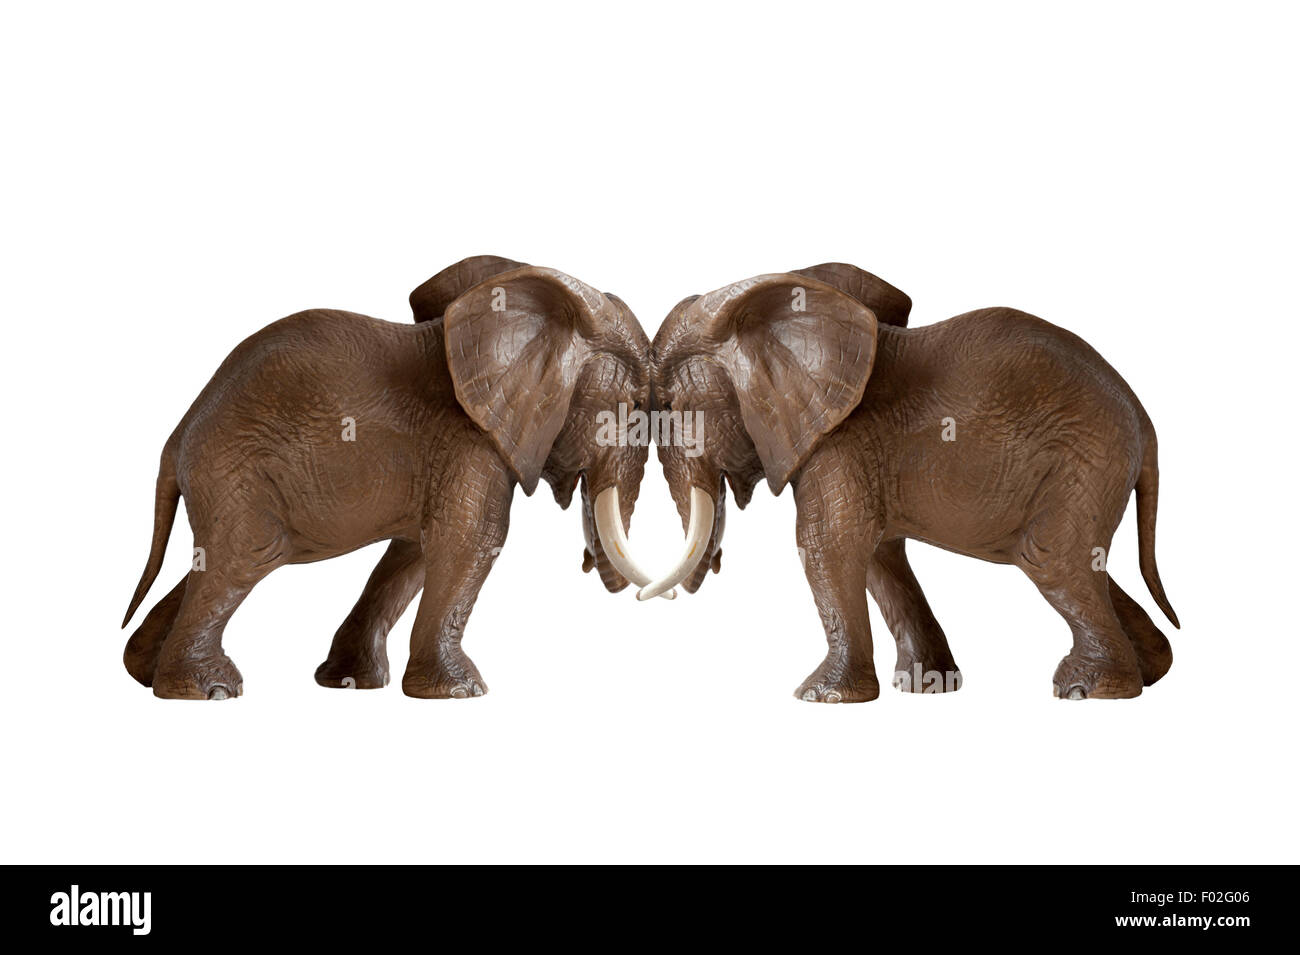 test of strength concept elephants pushing against each other isolated on white background Stock Photo